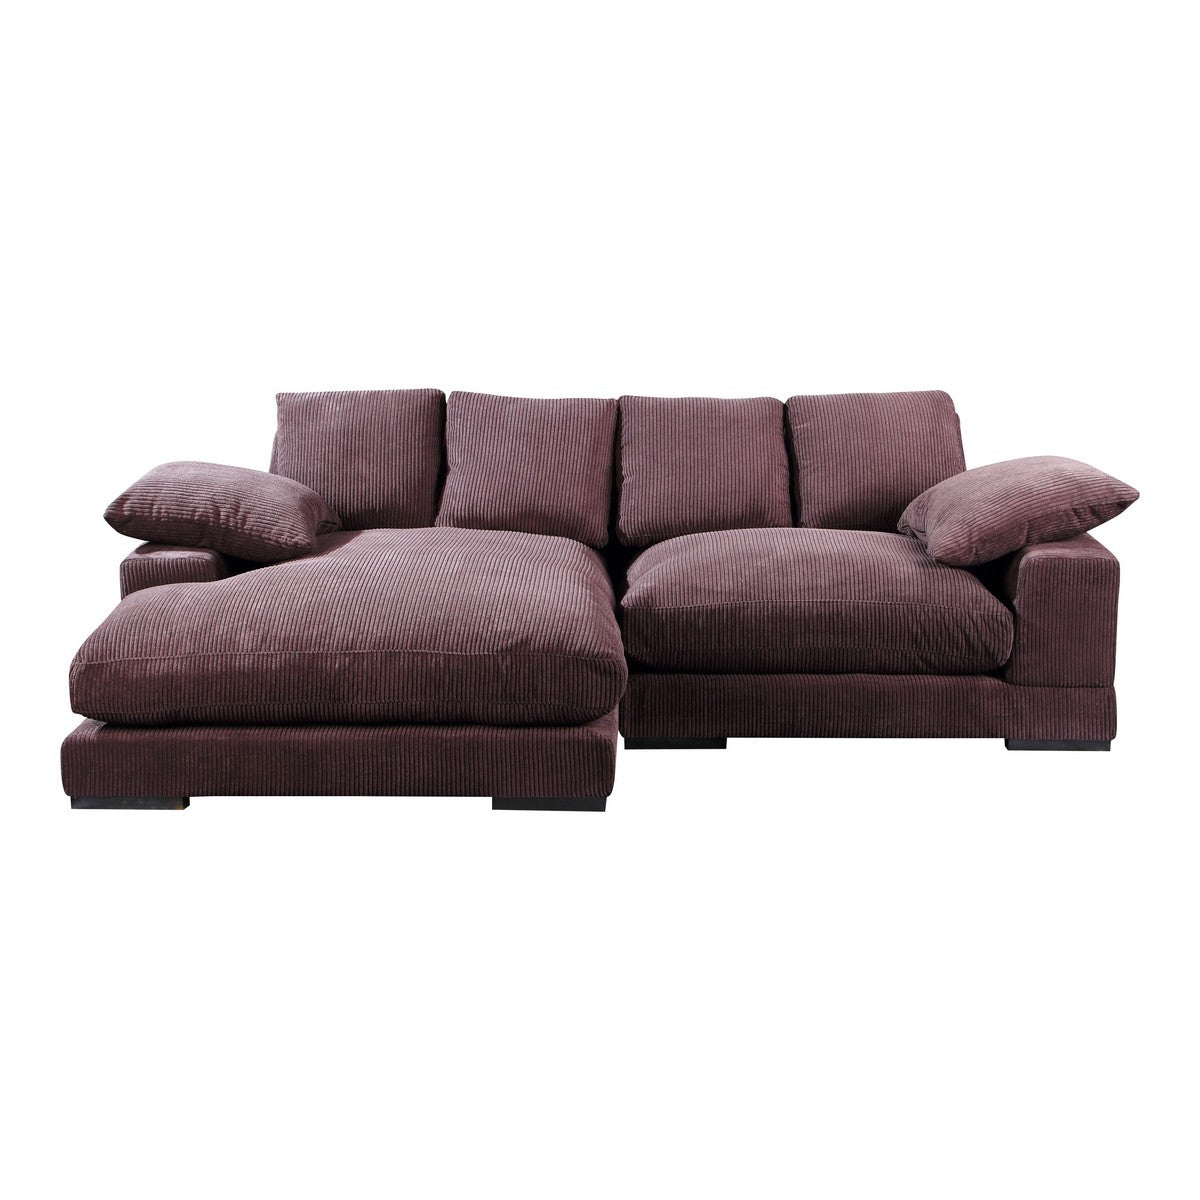 Moe's Home Collection Plunge Sectional Dark Brown - TN-1004-20 - Moe's Home Collection - sofa sectionals - Minimal And Modern - 1